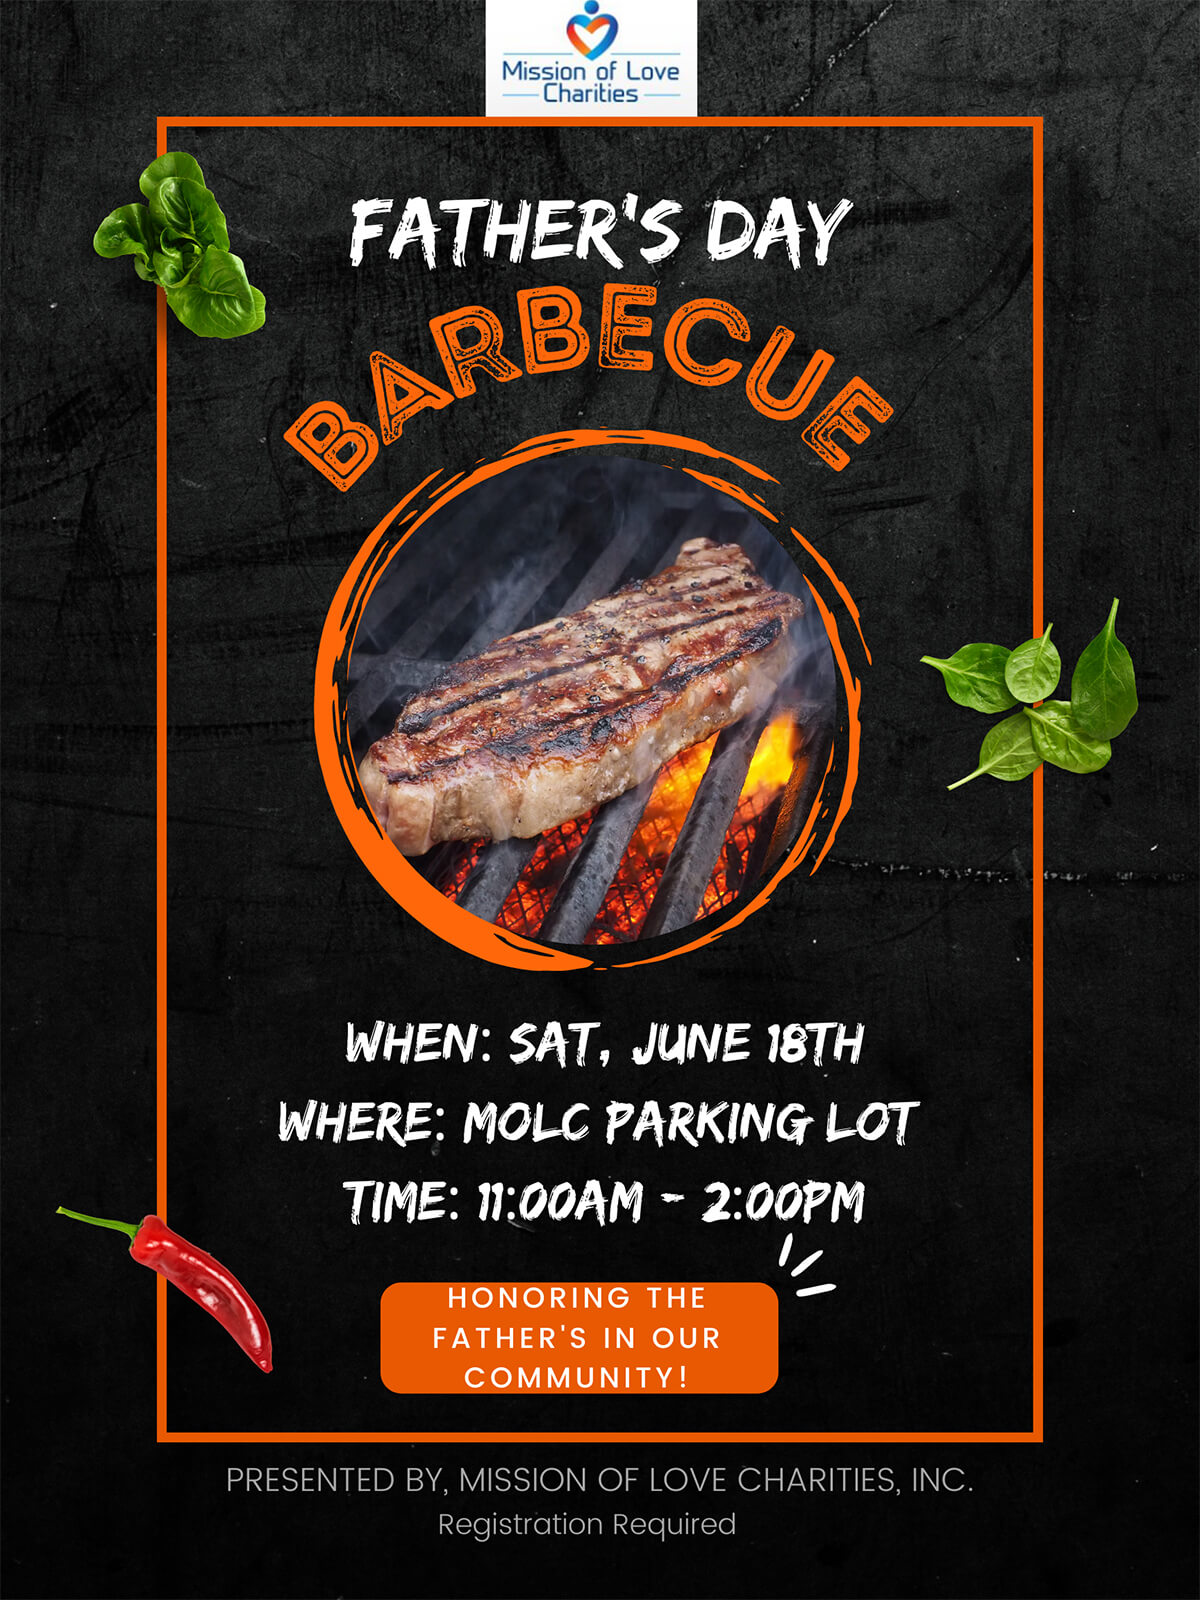 Father's Day Barbecue Flyer